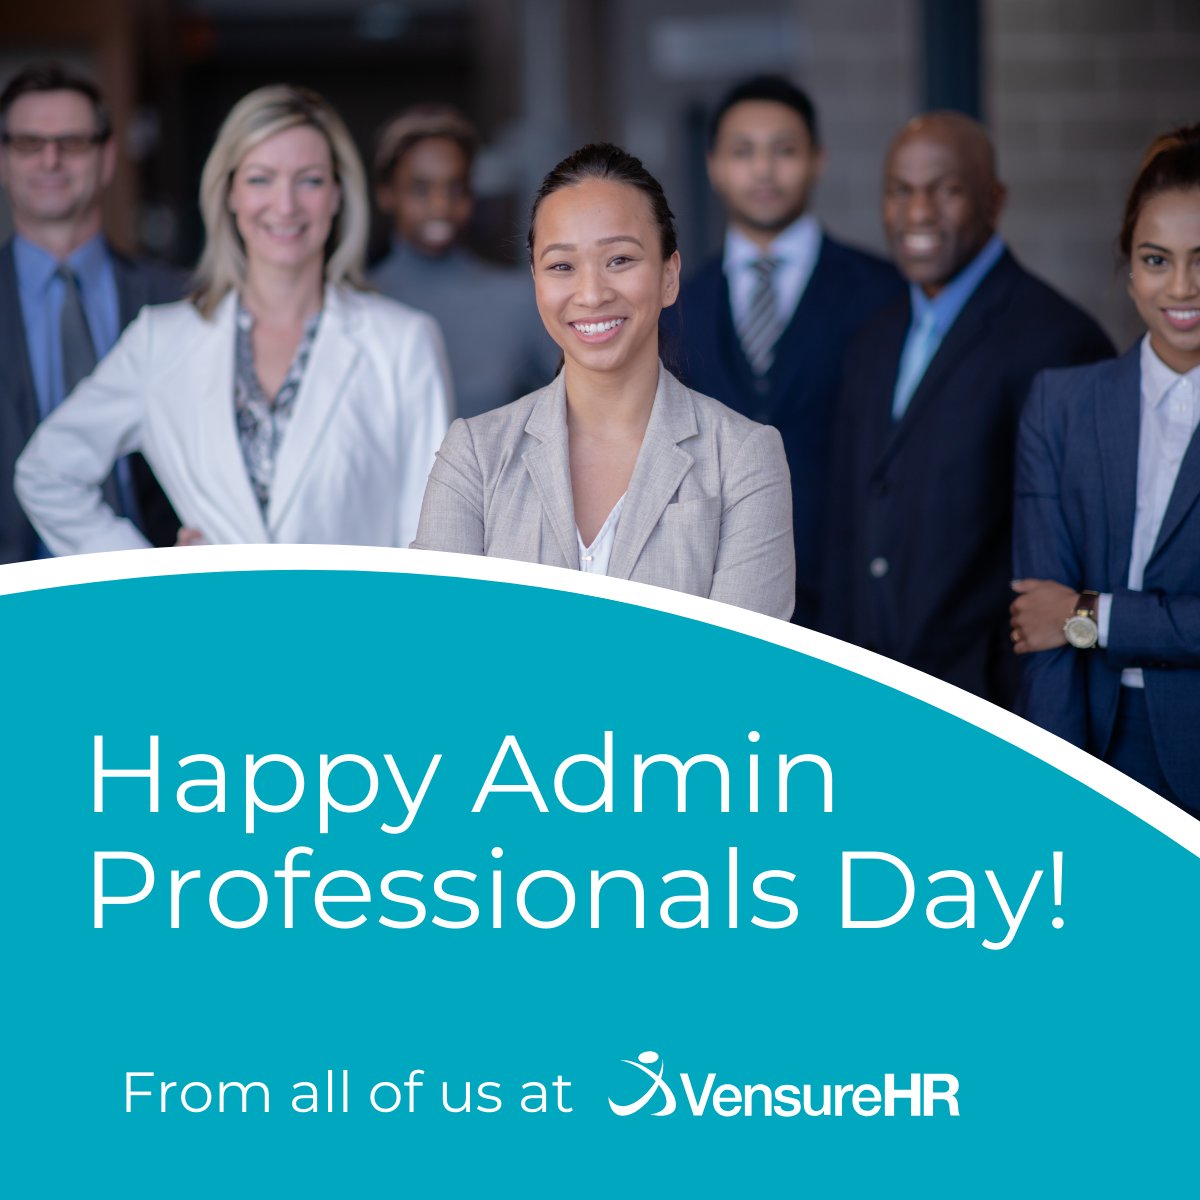 Let's give a round of applause to the unsung heroes who keep our workplaces running like clockwork! On this Administration Professional's Day, we take a moment to honor and appreciate the tireless efforts of administrative staff who manage schedules, coordinate meetings and more